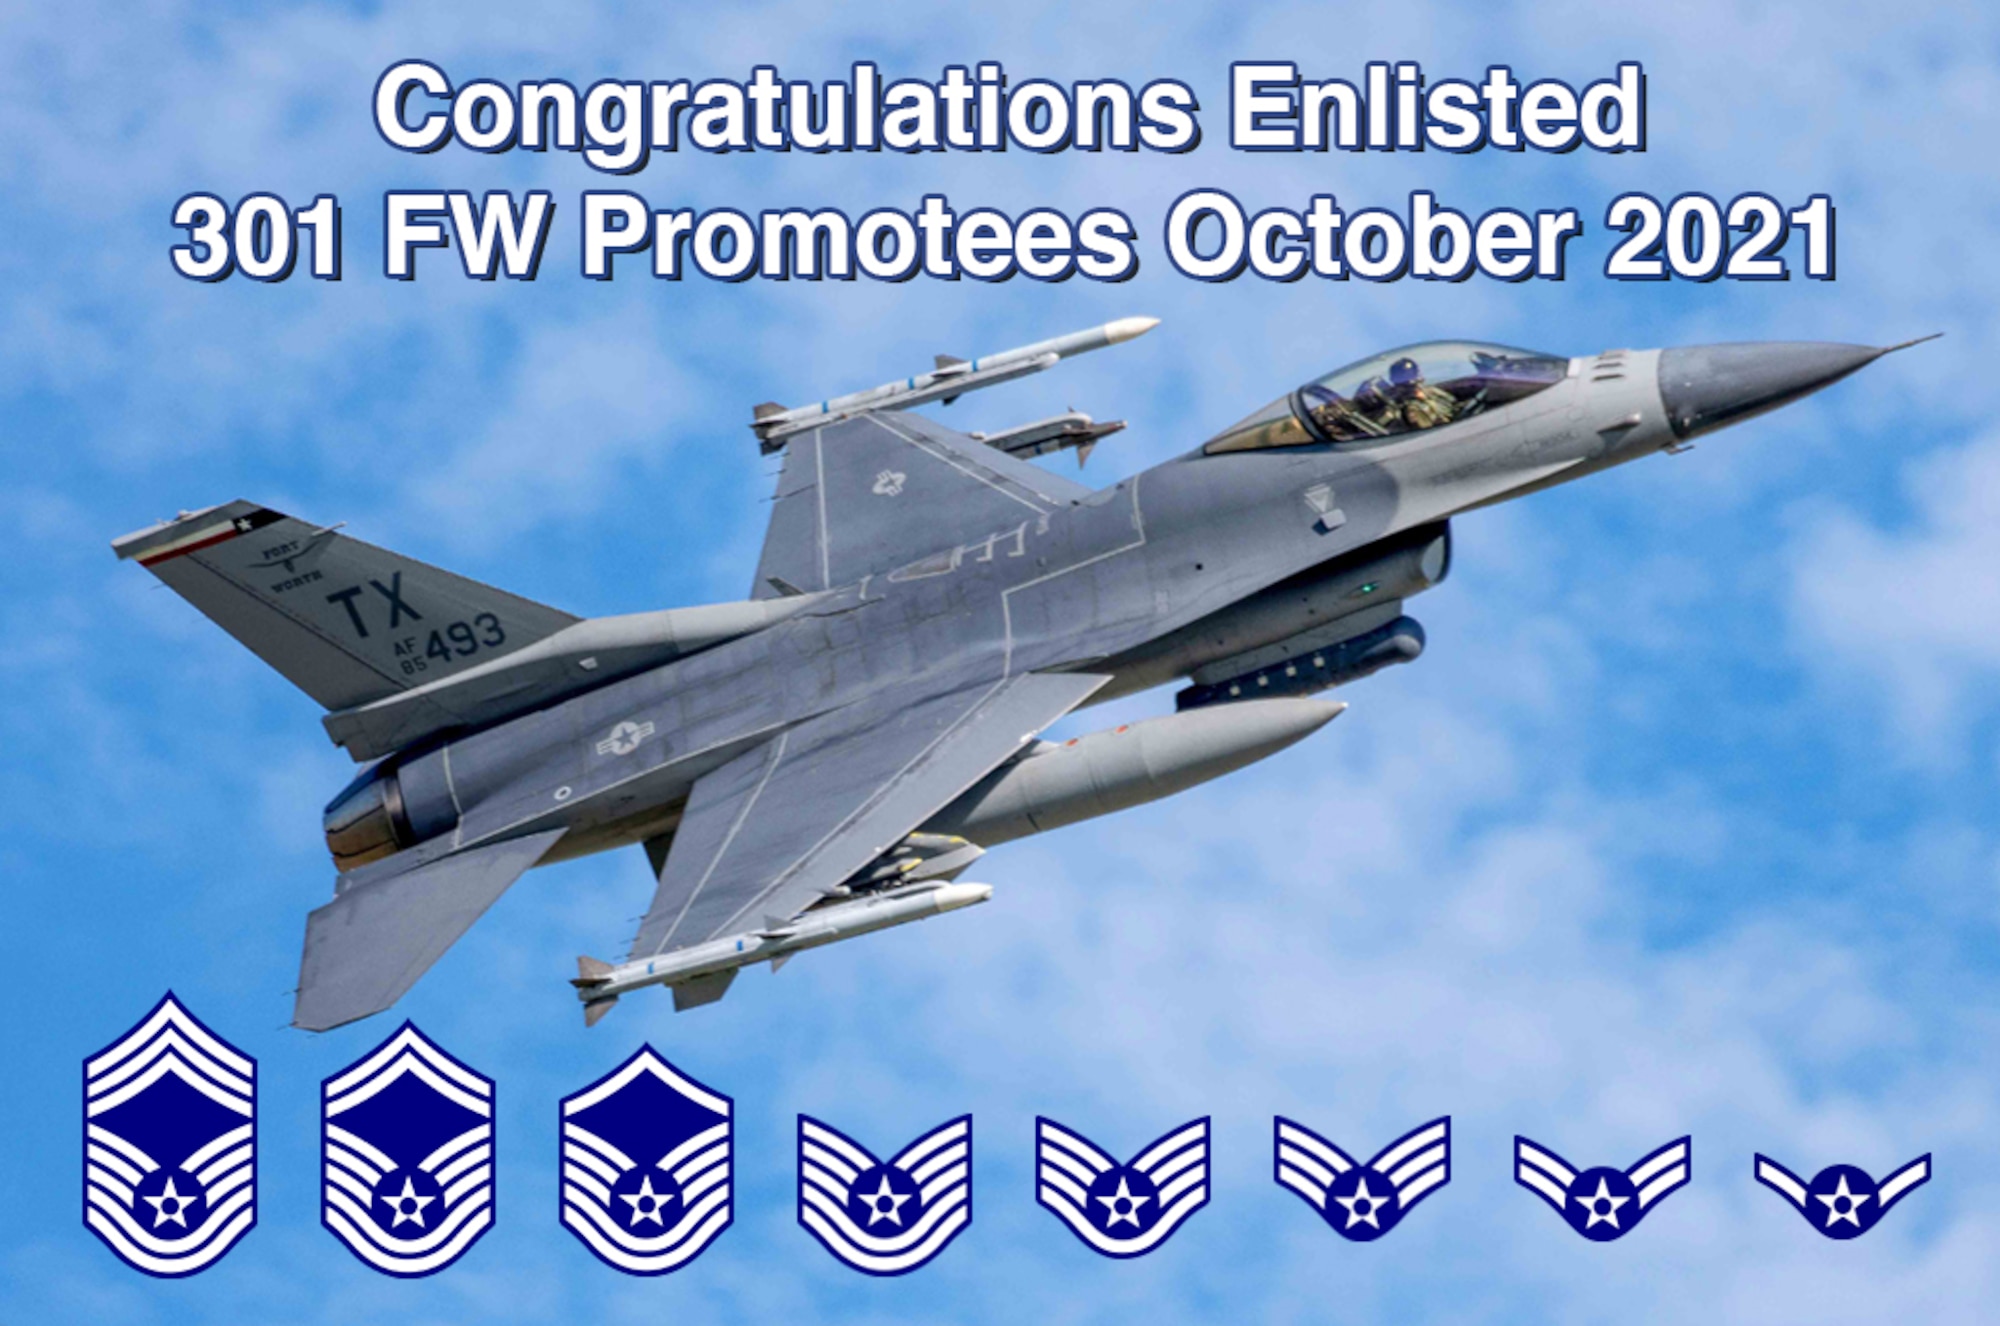 301 FW October 2021 Enlisted Promotions graphic. The F-16 is from the 457th Fighter Squadron, 301st Fighter Wing, Naval Air Station Joint Reserve Base Fort Worth, Texas. (U.S. Air Force graphic by Jeremy Roman)